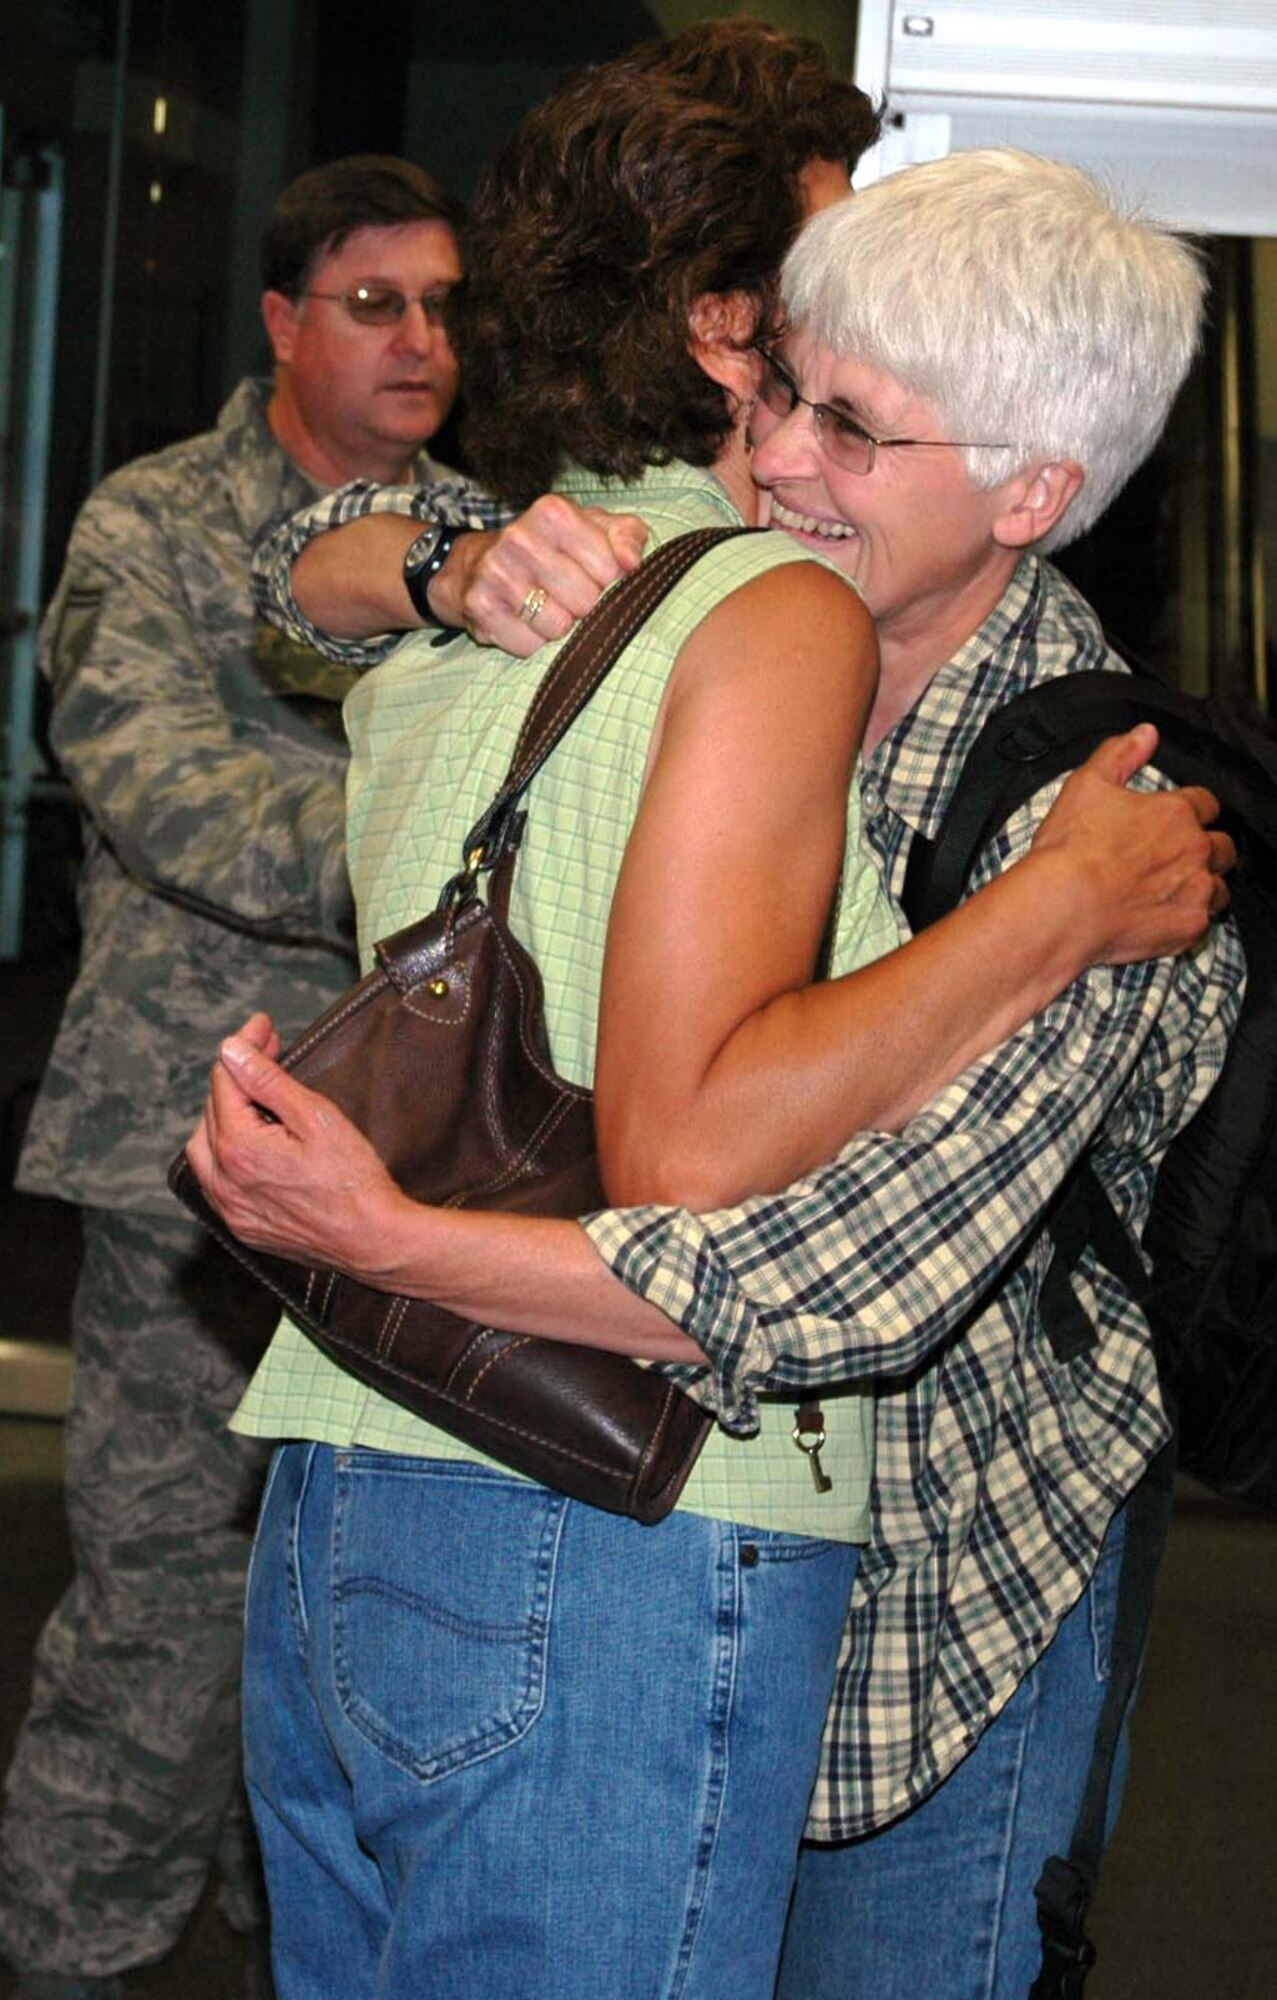 Col. Nina Gilberg (right), 934th Aeromedical Staging Squadron, is welcomed home by Lt Col. Phyllis Lawver, 934 ASTS, after her humanitarian deployment to Suriname South America as Senior Master Sgt. Tim Atchley, 934 ASTS, looks on. The role of the 934th ASTS members was to work alongside with the Surinamese military to provide dental, eye, veterinarian, pharmaceutical, and general health care to the people and animals of Suriname.